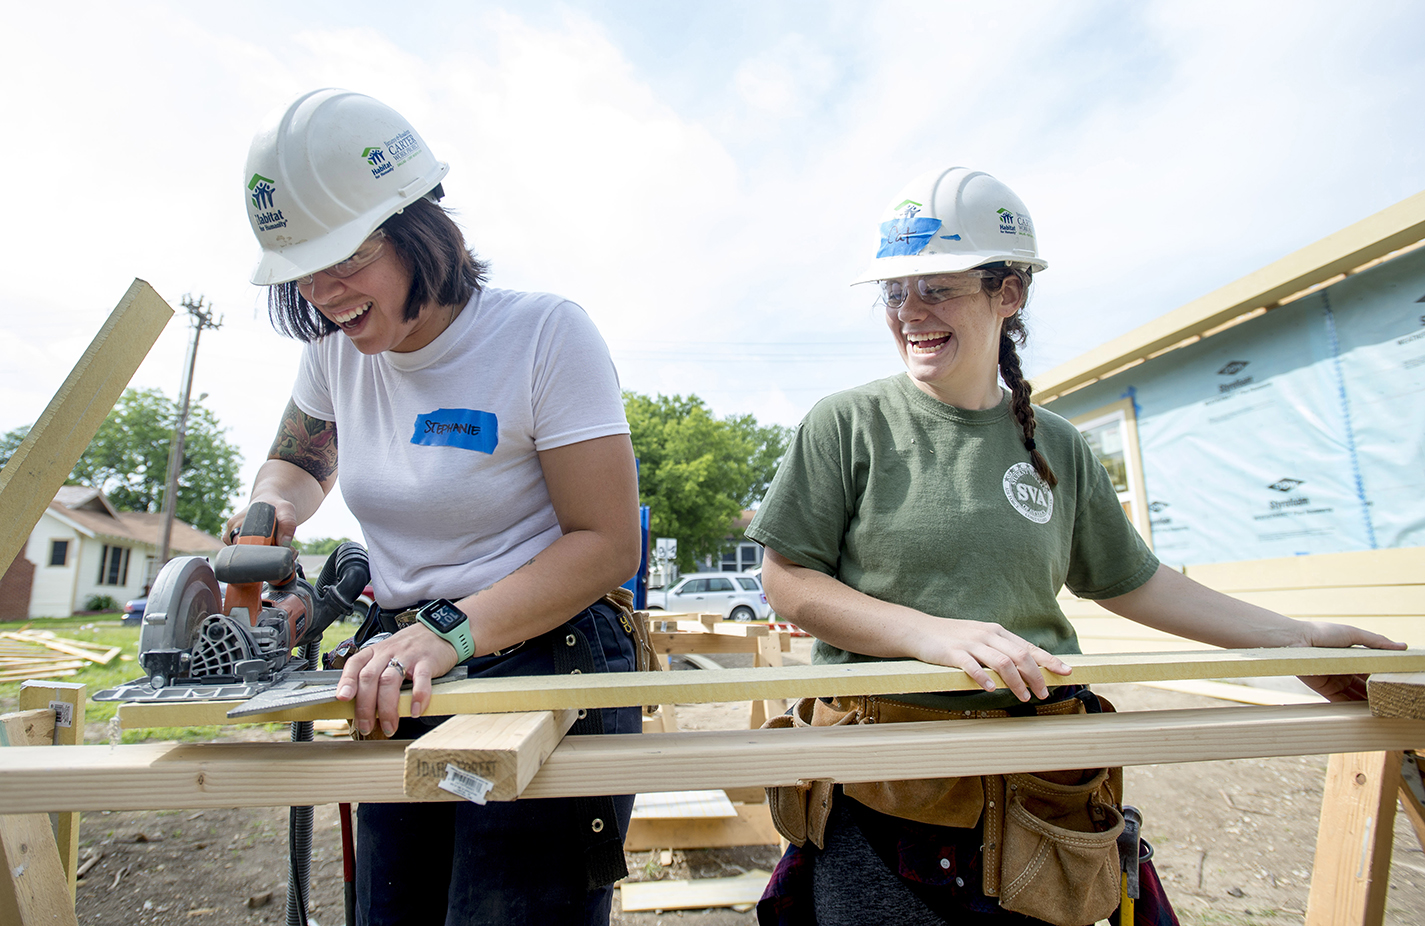 South students Stephanie Clements and Caitlin Lewis help give back to the community while working toward building a home for someone in need. NE students can volunteer to help out in the community during the campus’ Big Day of Service April 2.